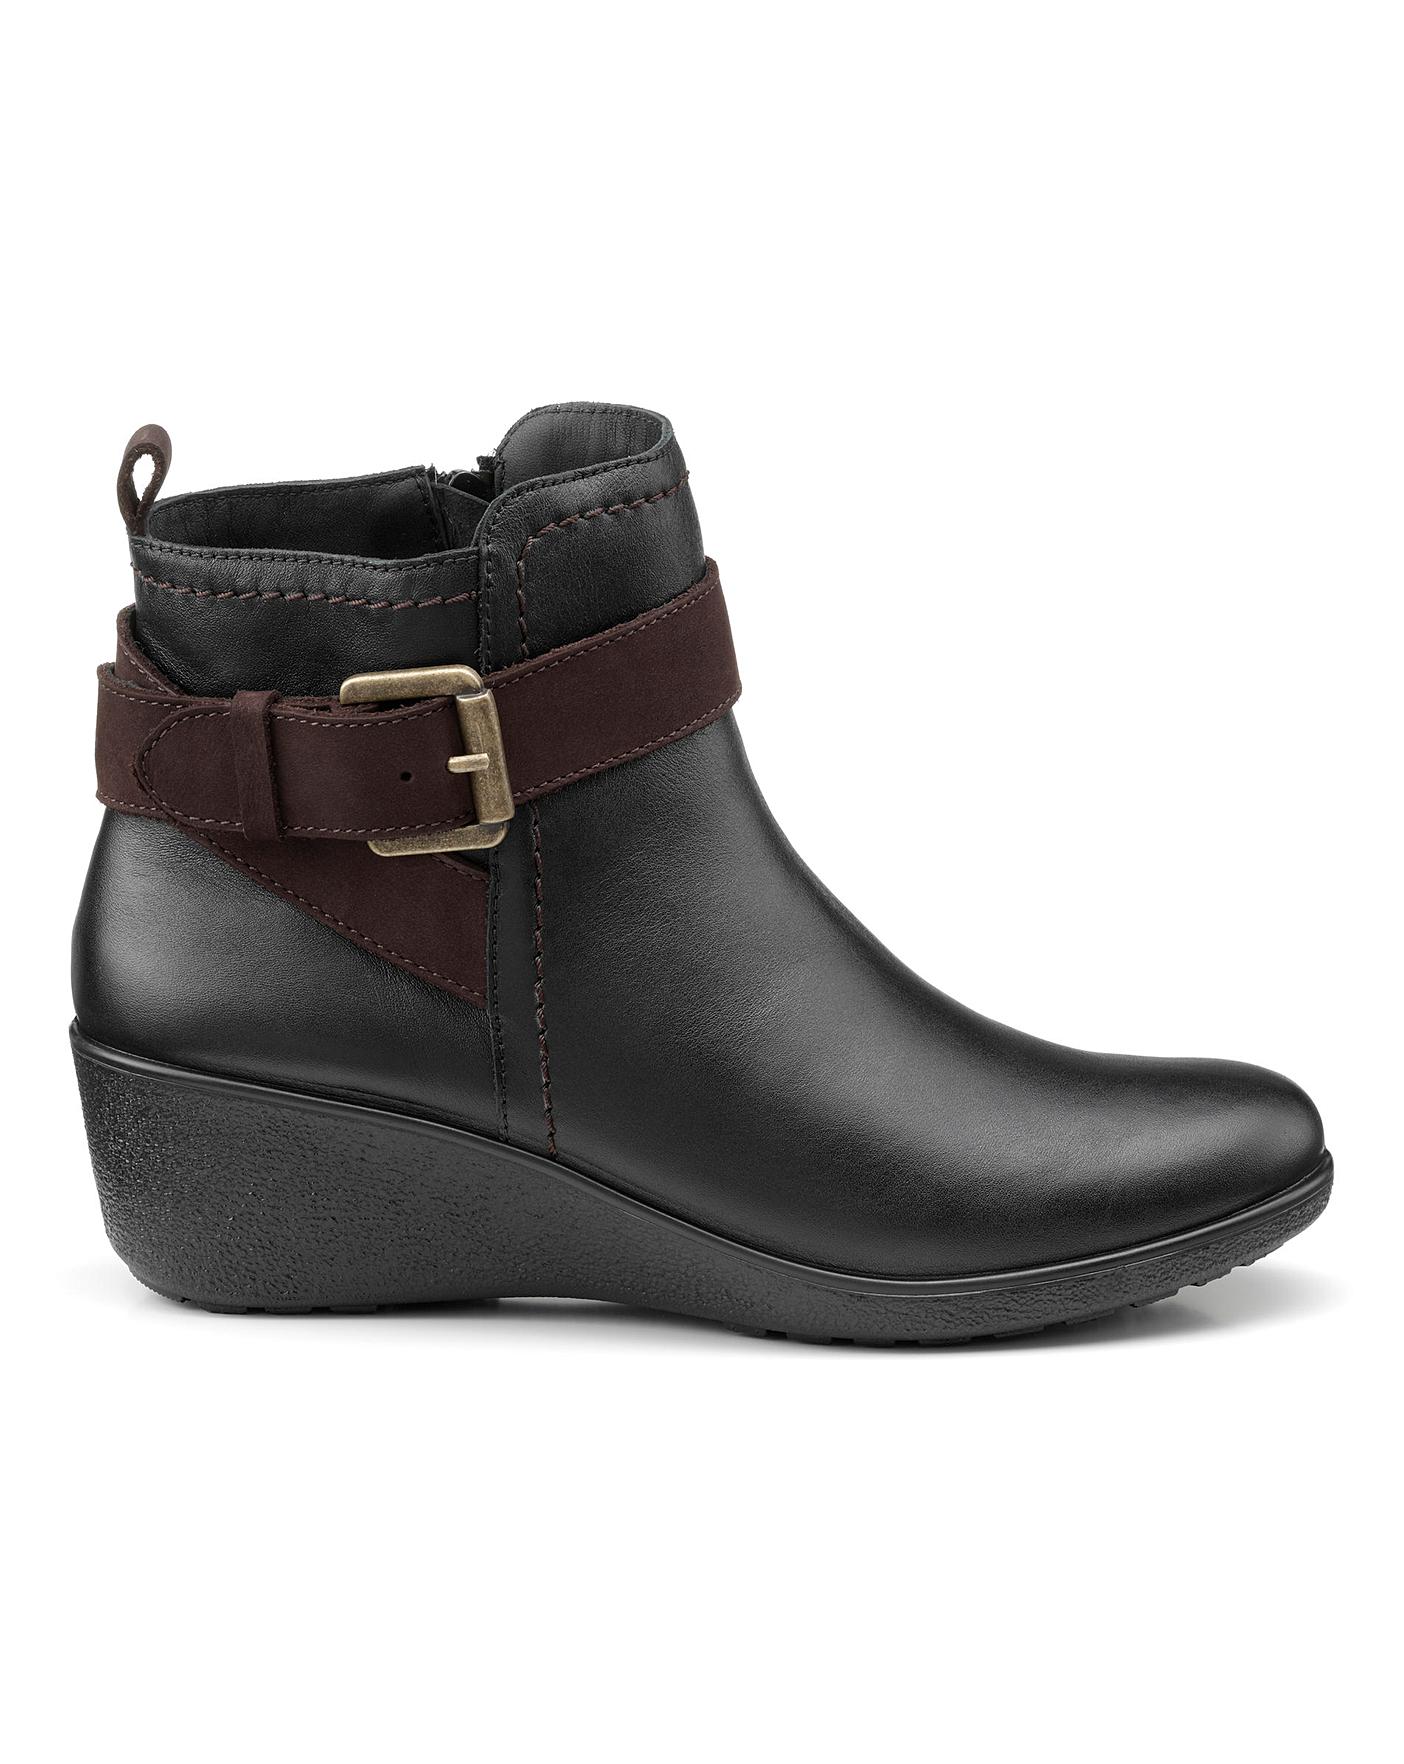 hotters ankle boots